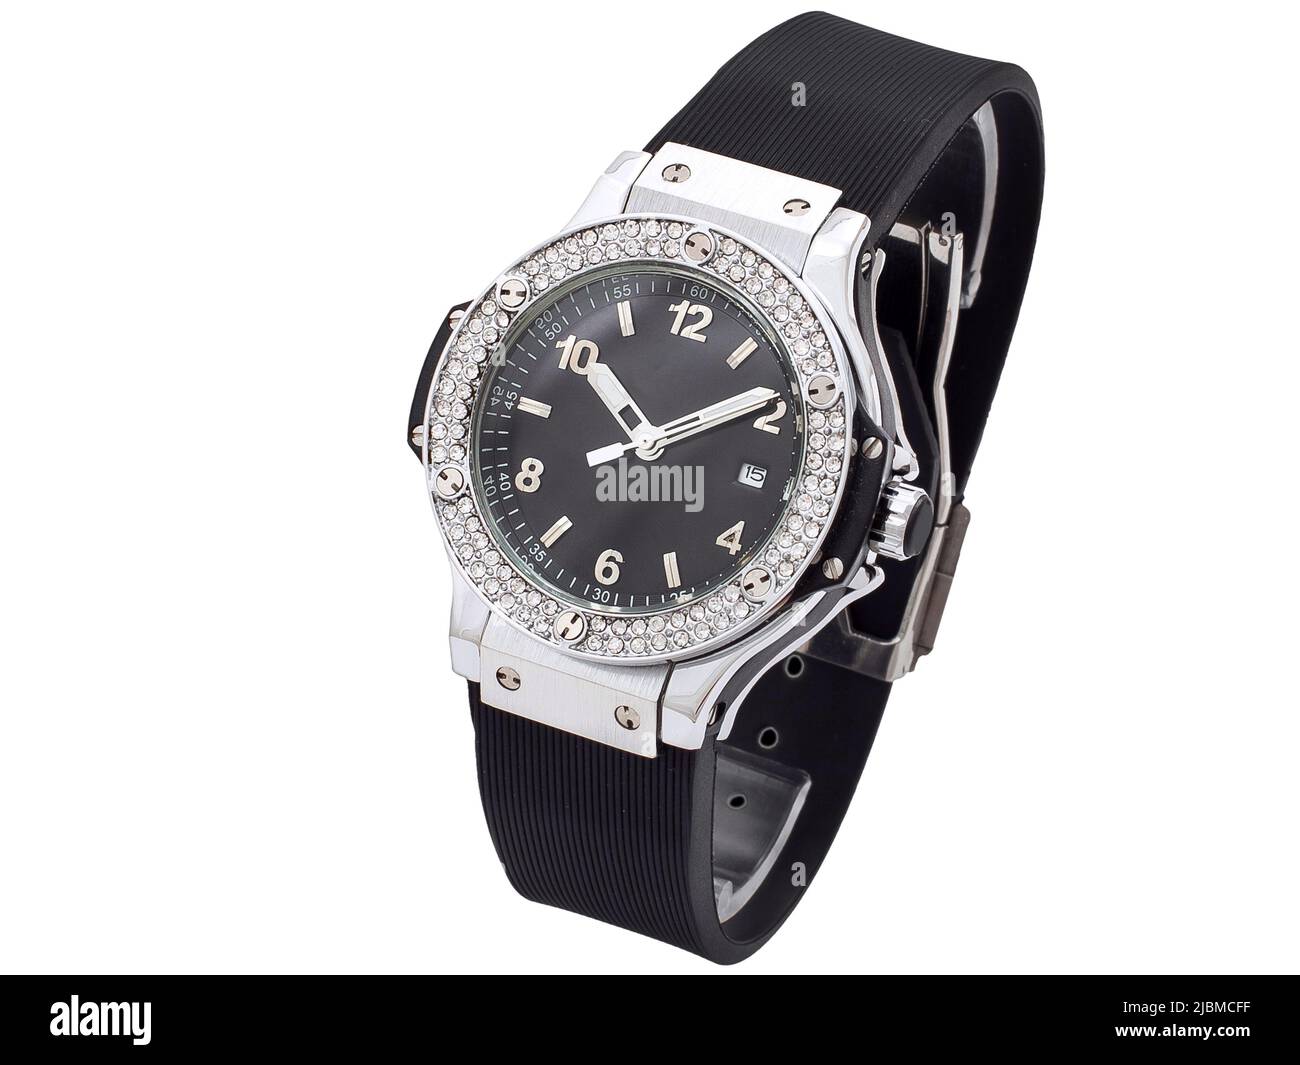 women's wrist watch with a rubber strap and a steel dial encrusted with precious stones and diamonds, a luxury object isolated on a white background, Stock Photo